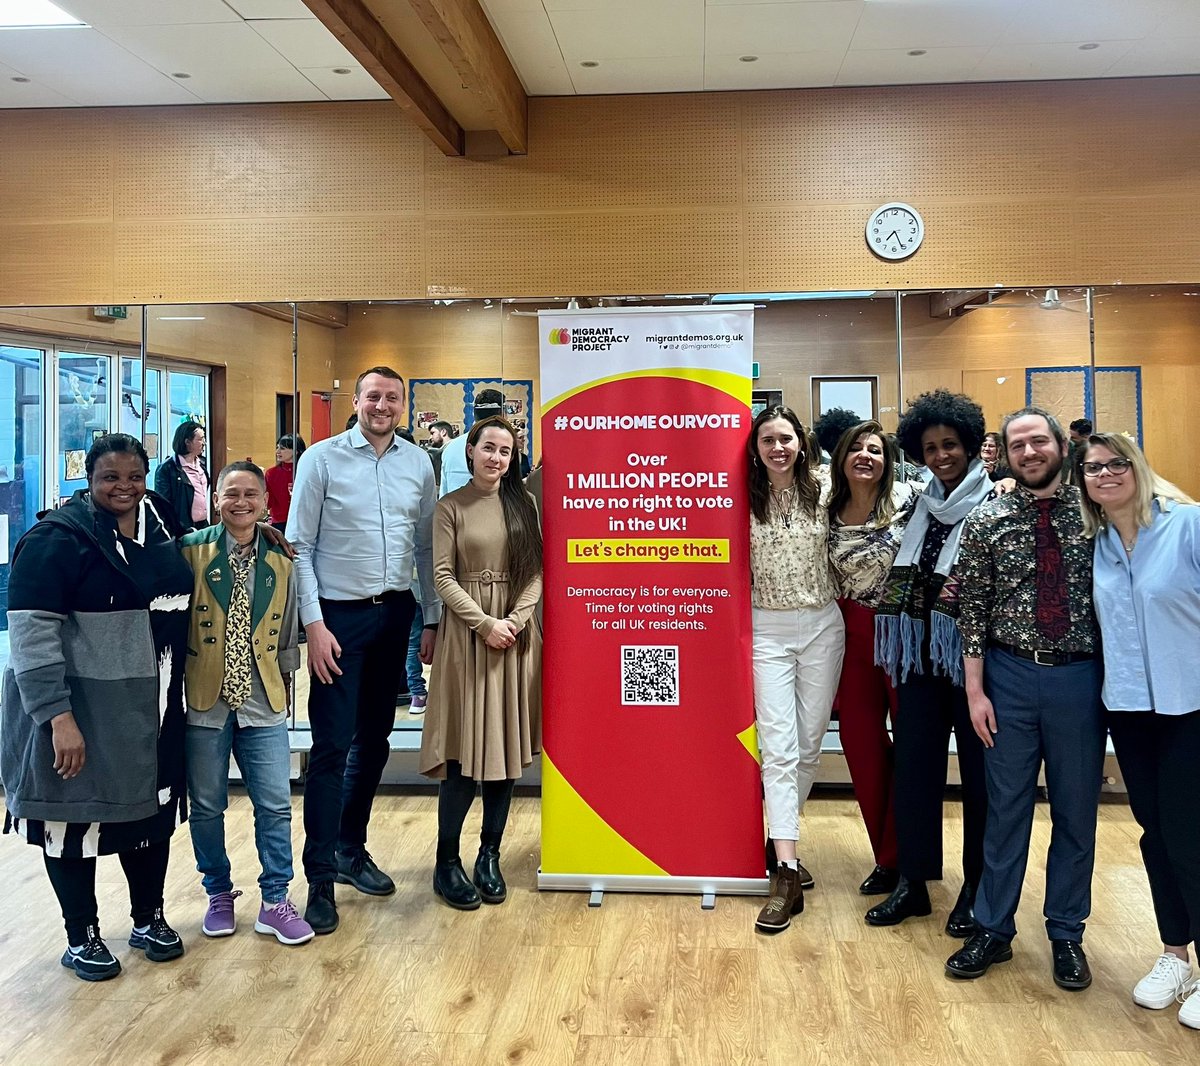 🌟 A Proudful Moment: Future Migrant Leaders - UK @MigrantDemos 📣As a #Colchestrian & University of Essex Alumni, I would like to share positive news and a proud moment of mine with fellow residents and @Uni_of_Essex students. #Colchester #Community #Diversity #inclusion